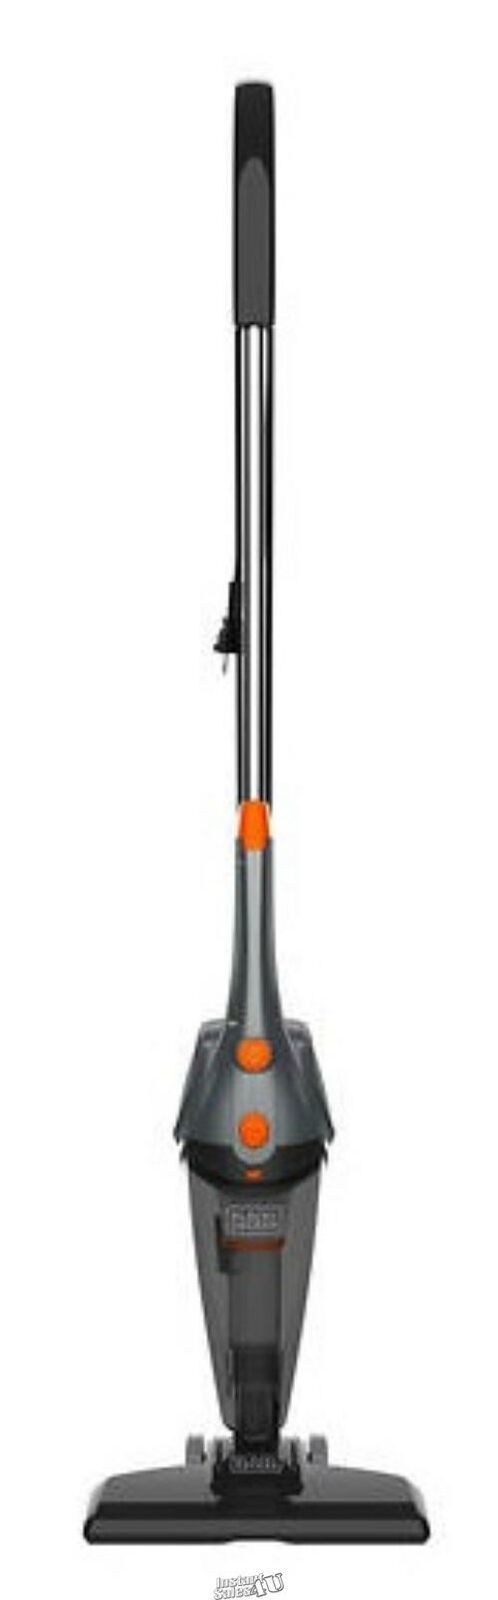 Black and Decker 3 In 1 Convertible Corded Upright Handheld Stair Vacuum Cleaner - $47.49